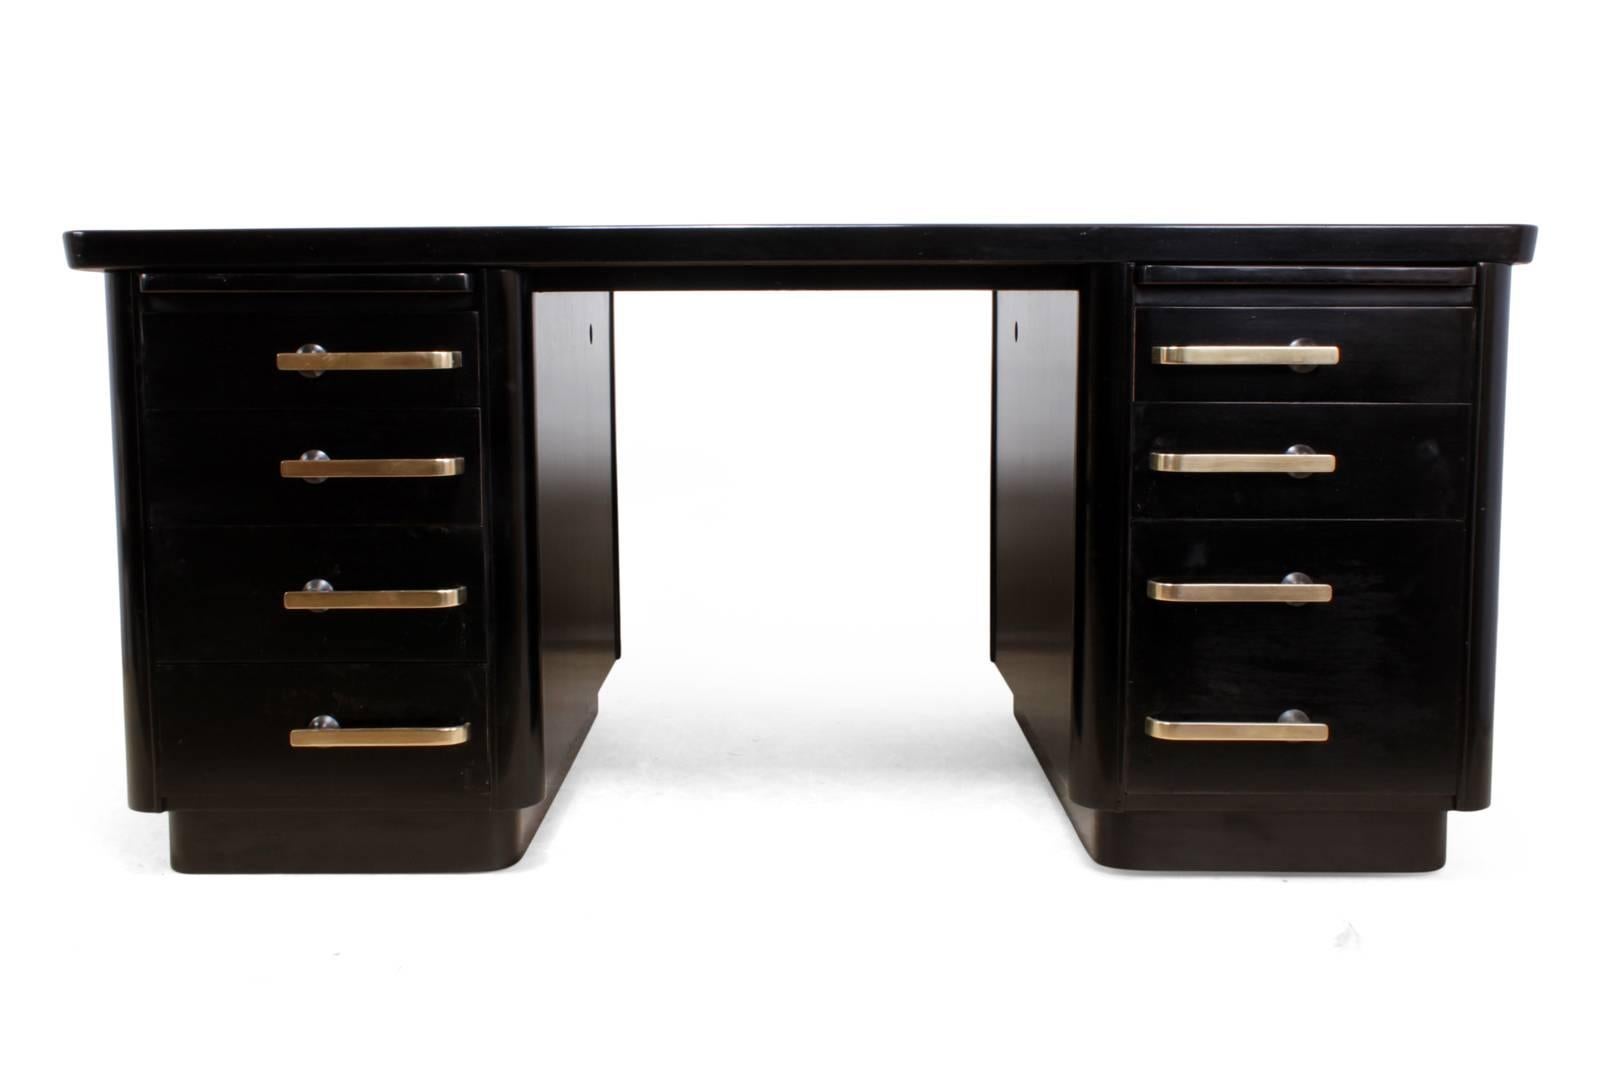 Art Deco black desk 
An Art Deco desk with seven drawers double depth filing drawer to right, two slides and finished in black piano lacquer with complimenting bronze handles and a new leather top, the desk has been fully restored and in excellent